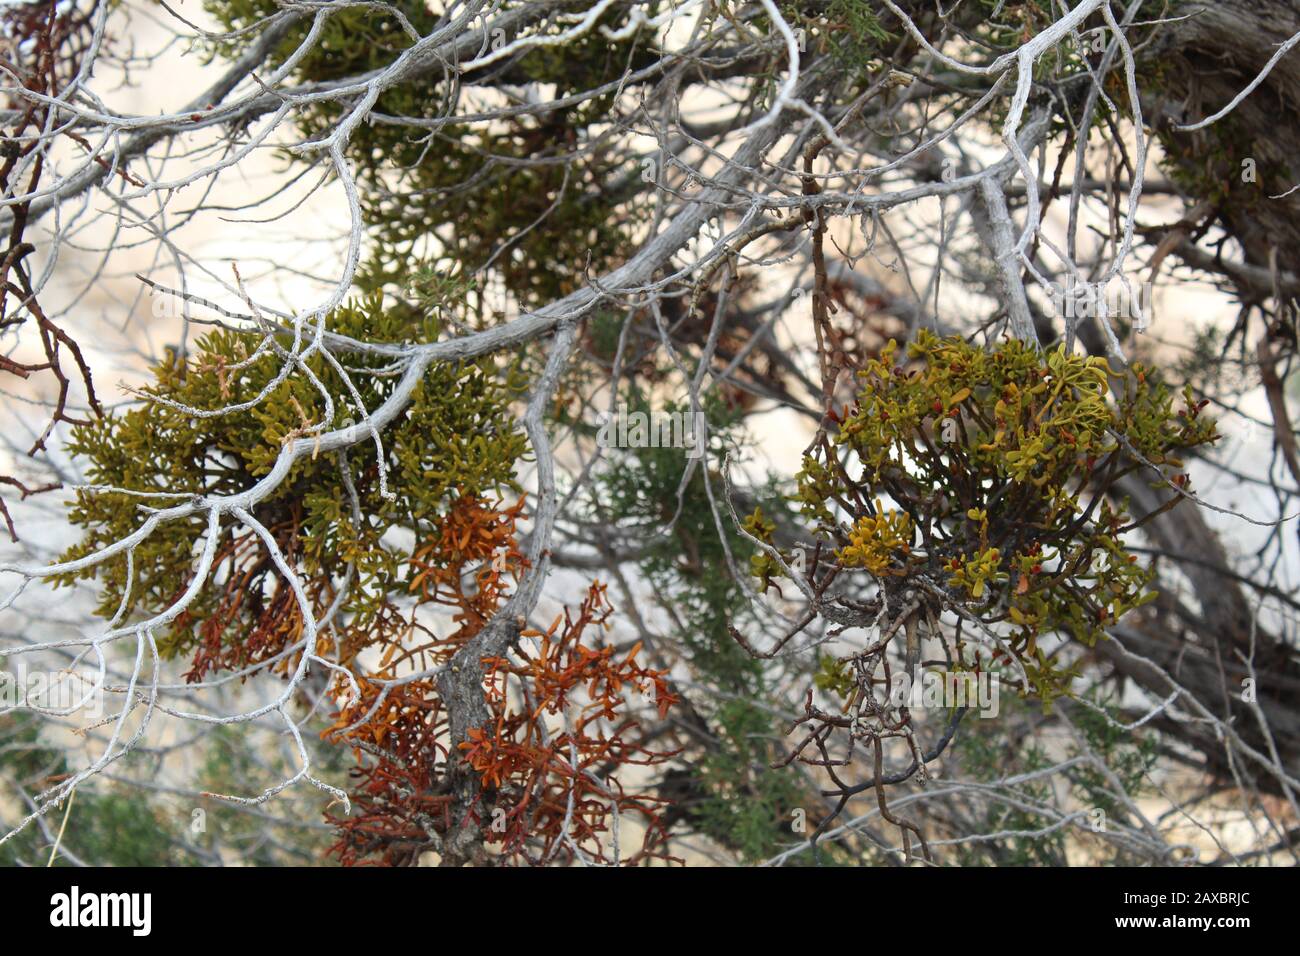 Hemiparasitic Southern Mojave Desert native Bollean Mistletoe, Phoradendron Bolleanum, differs from purely parasitic counterparts with photosynthesis. Stock Photo